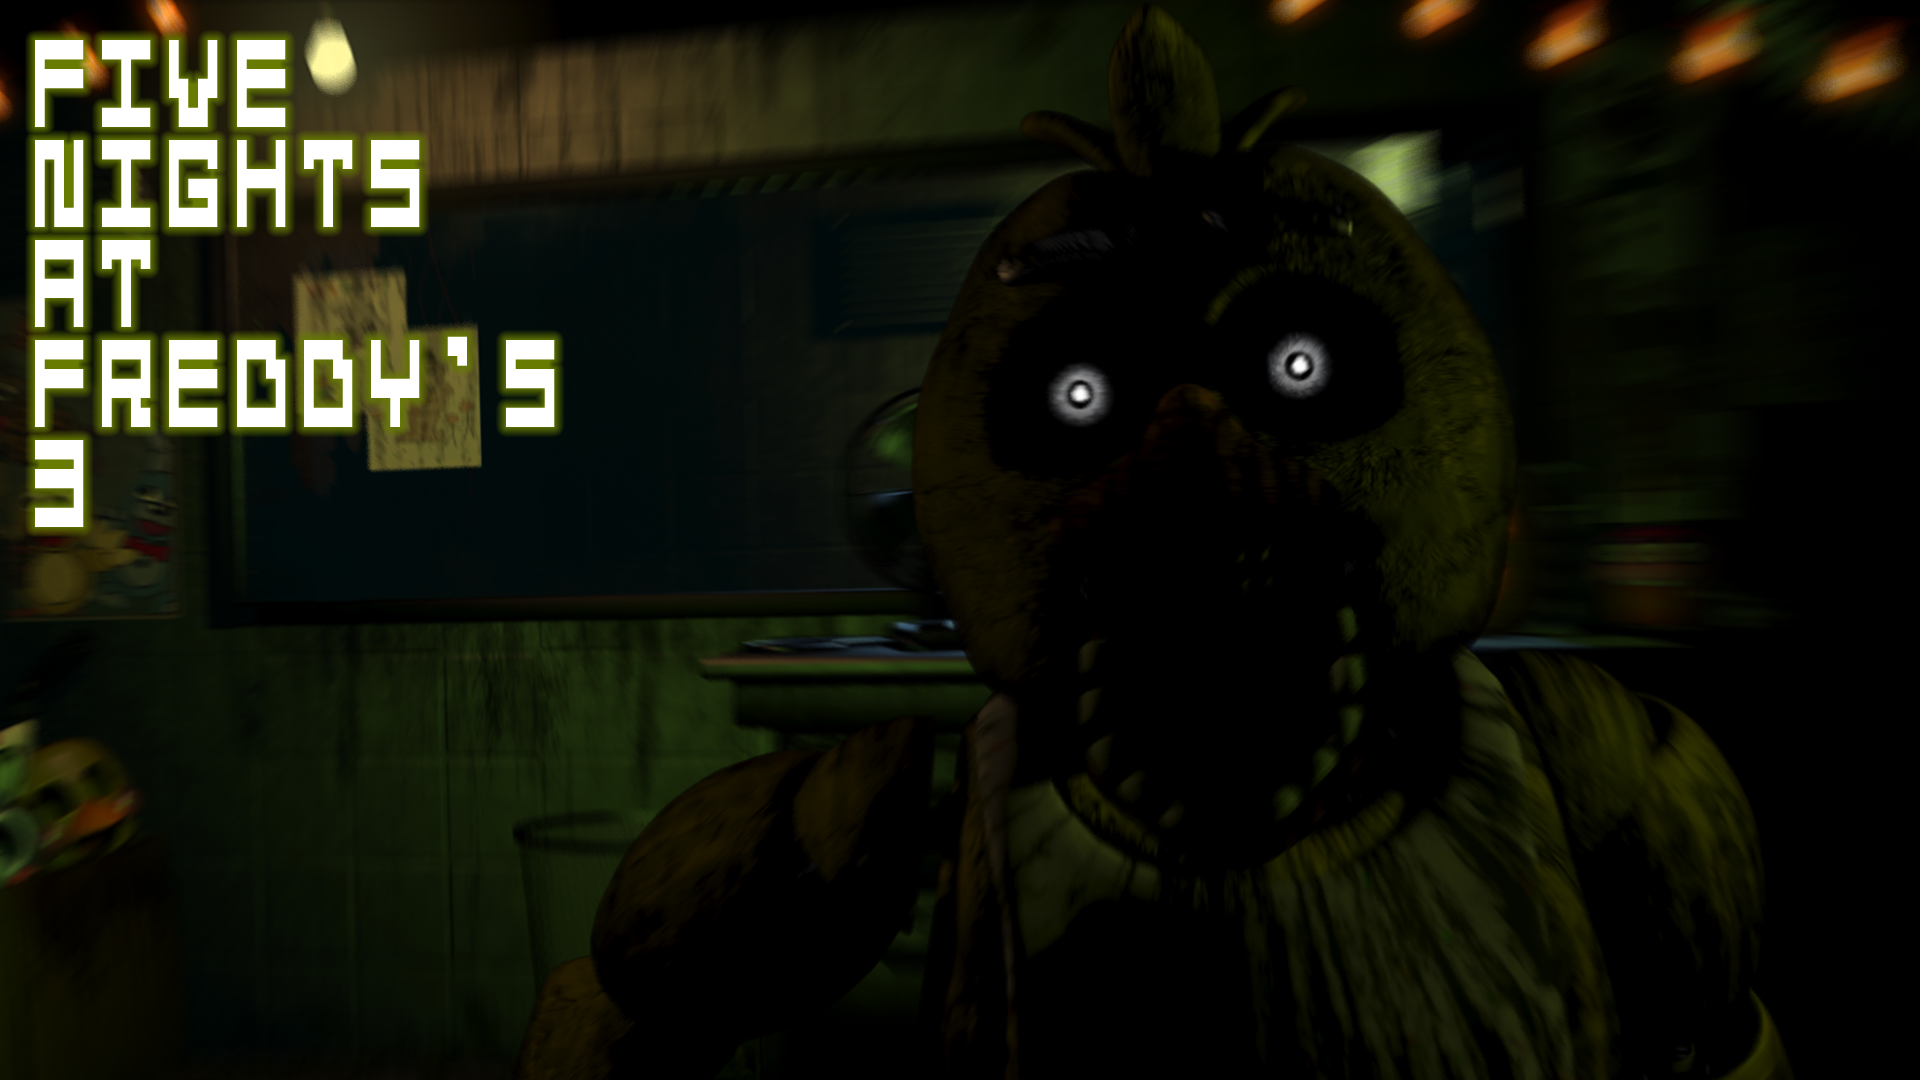 Two Nights at Freddy's